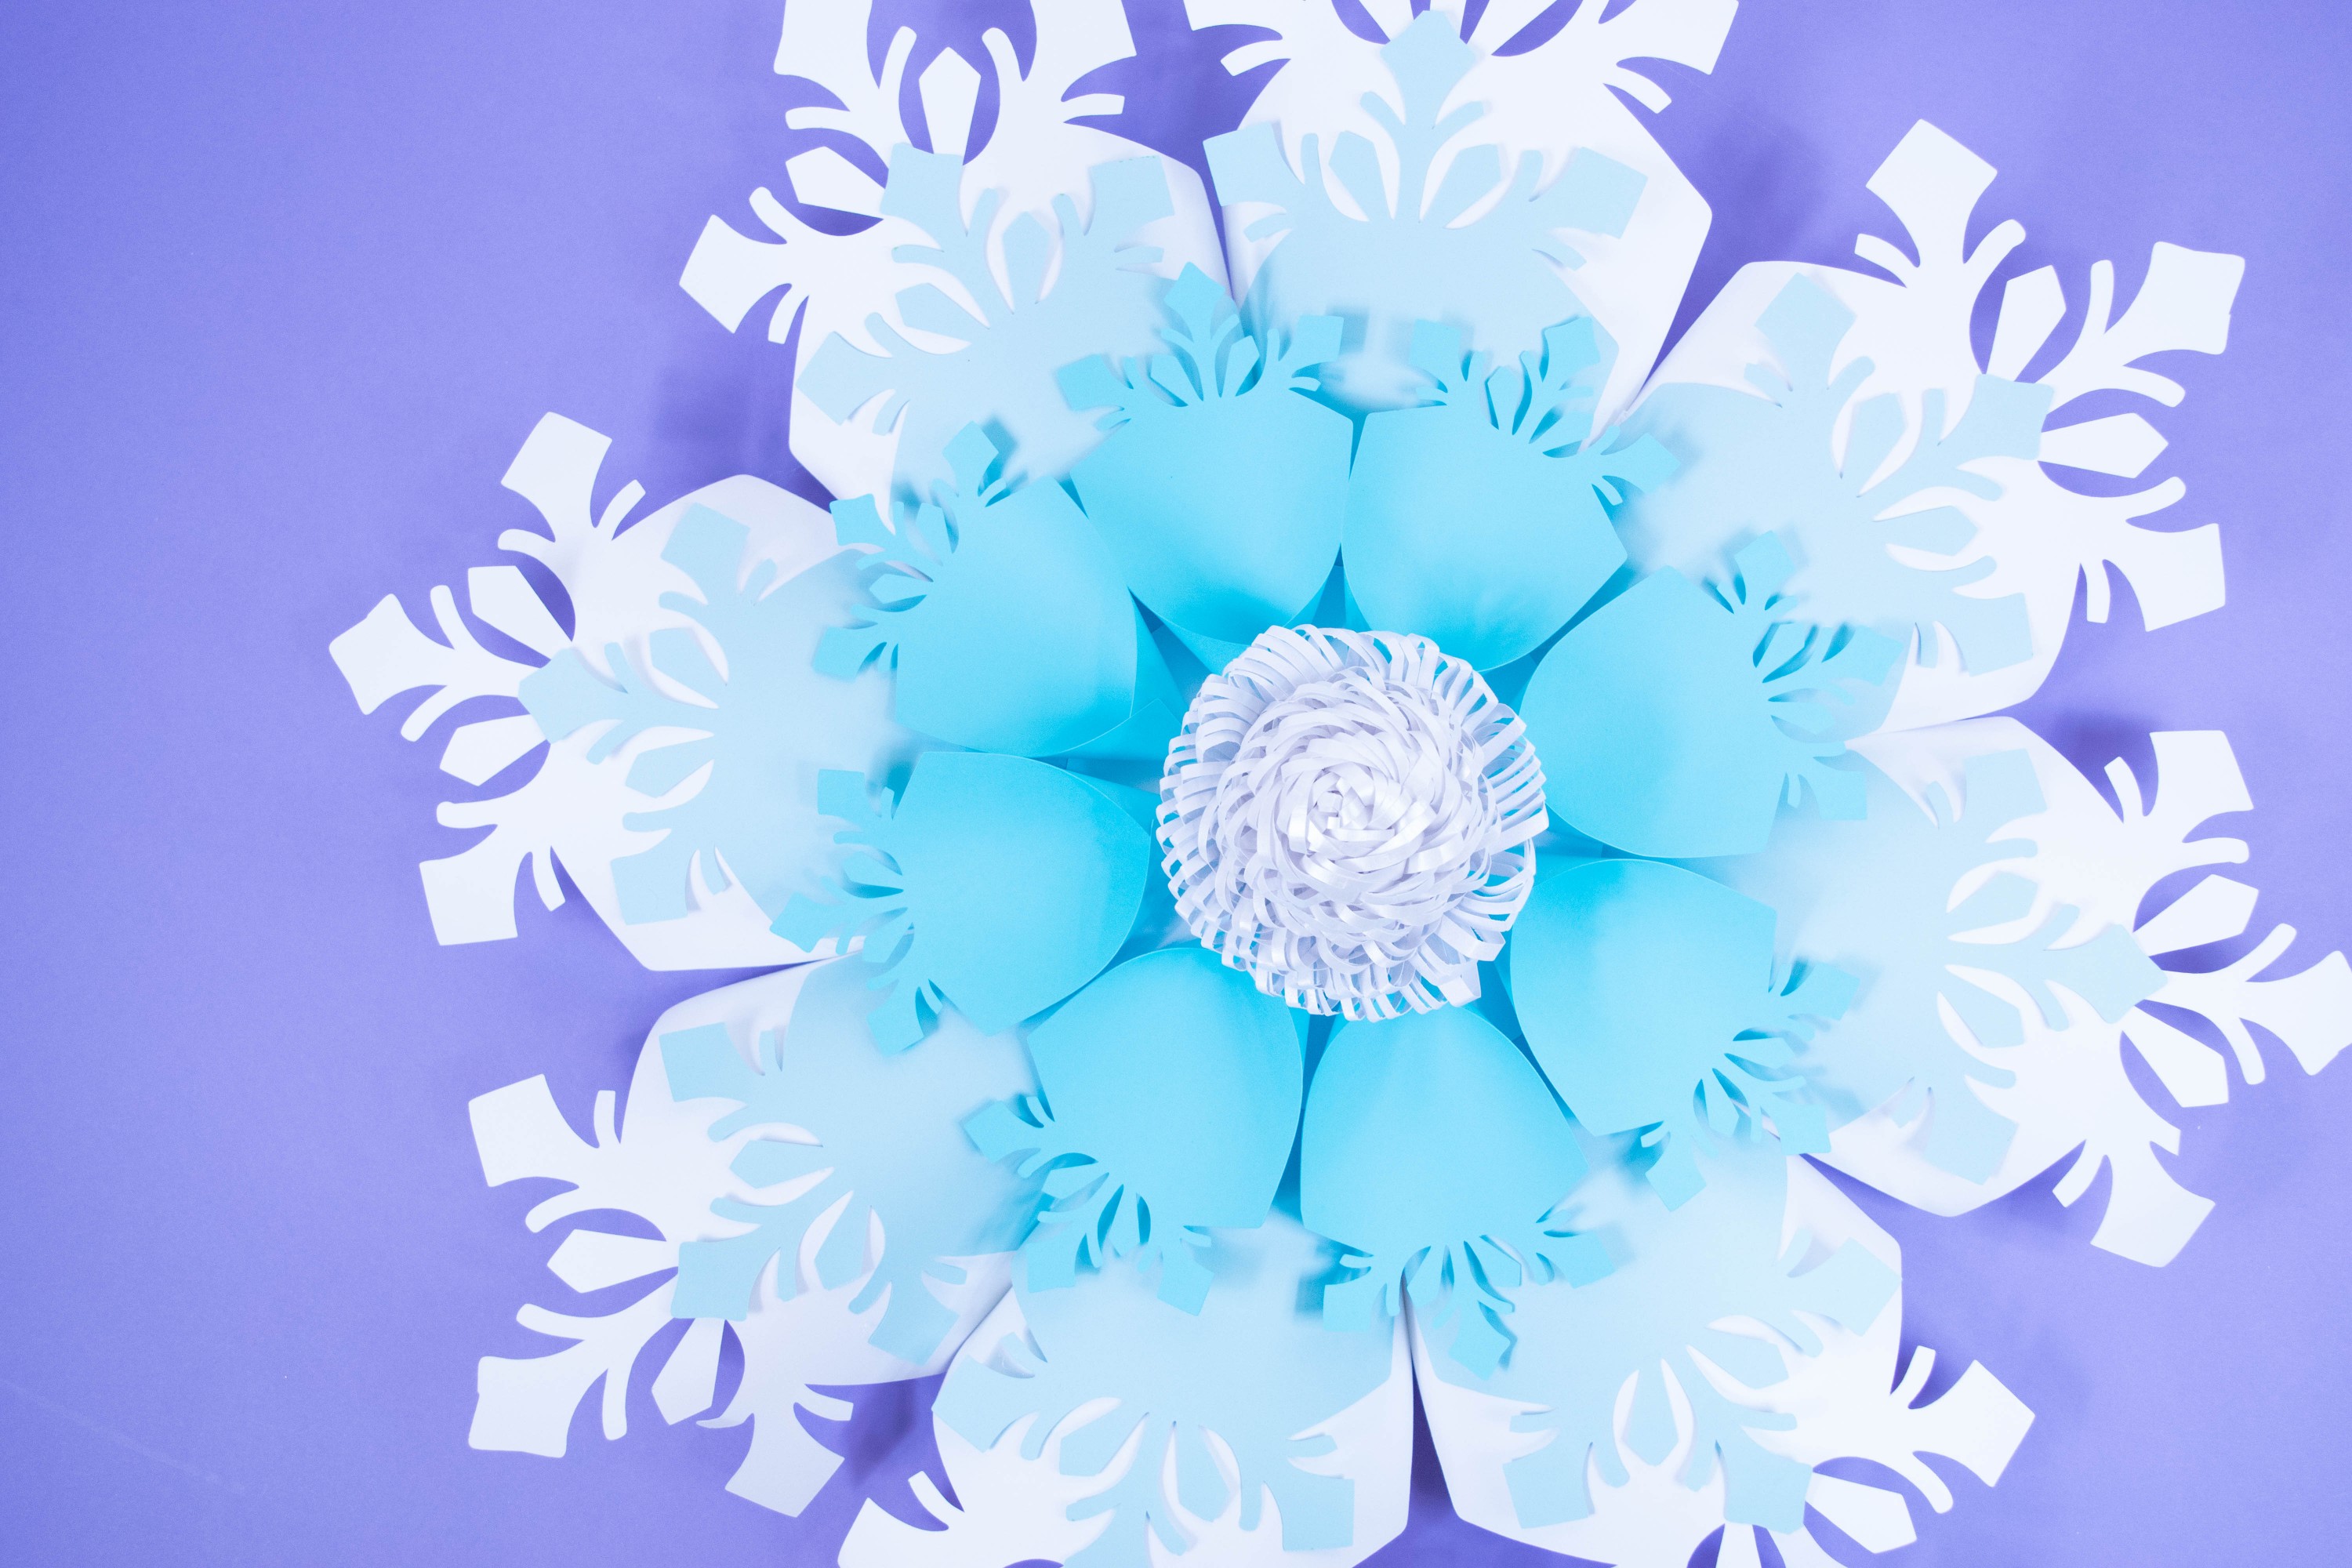 Create your own easy giant paper snowflakes with our paper snowflake tutorial and template. Deck your halls for Christmas with these big paper snowflakes. 